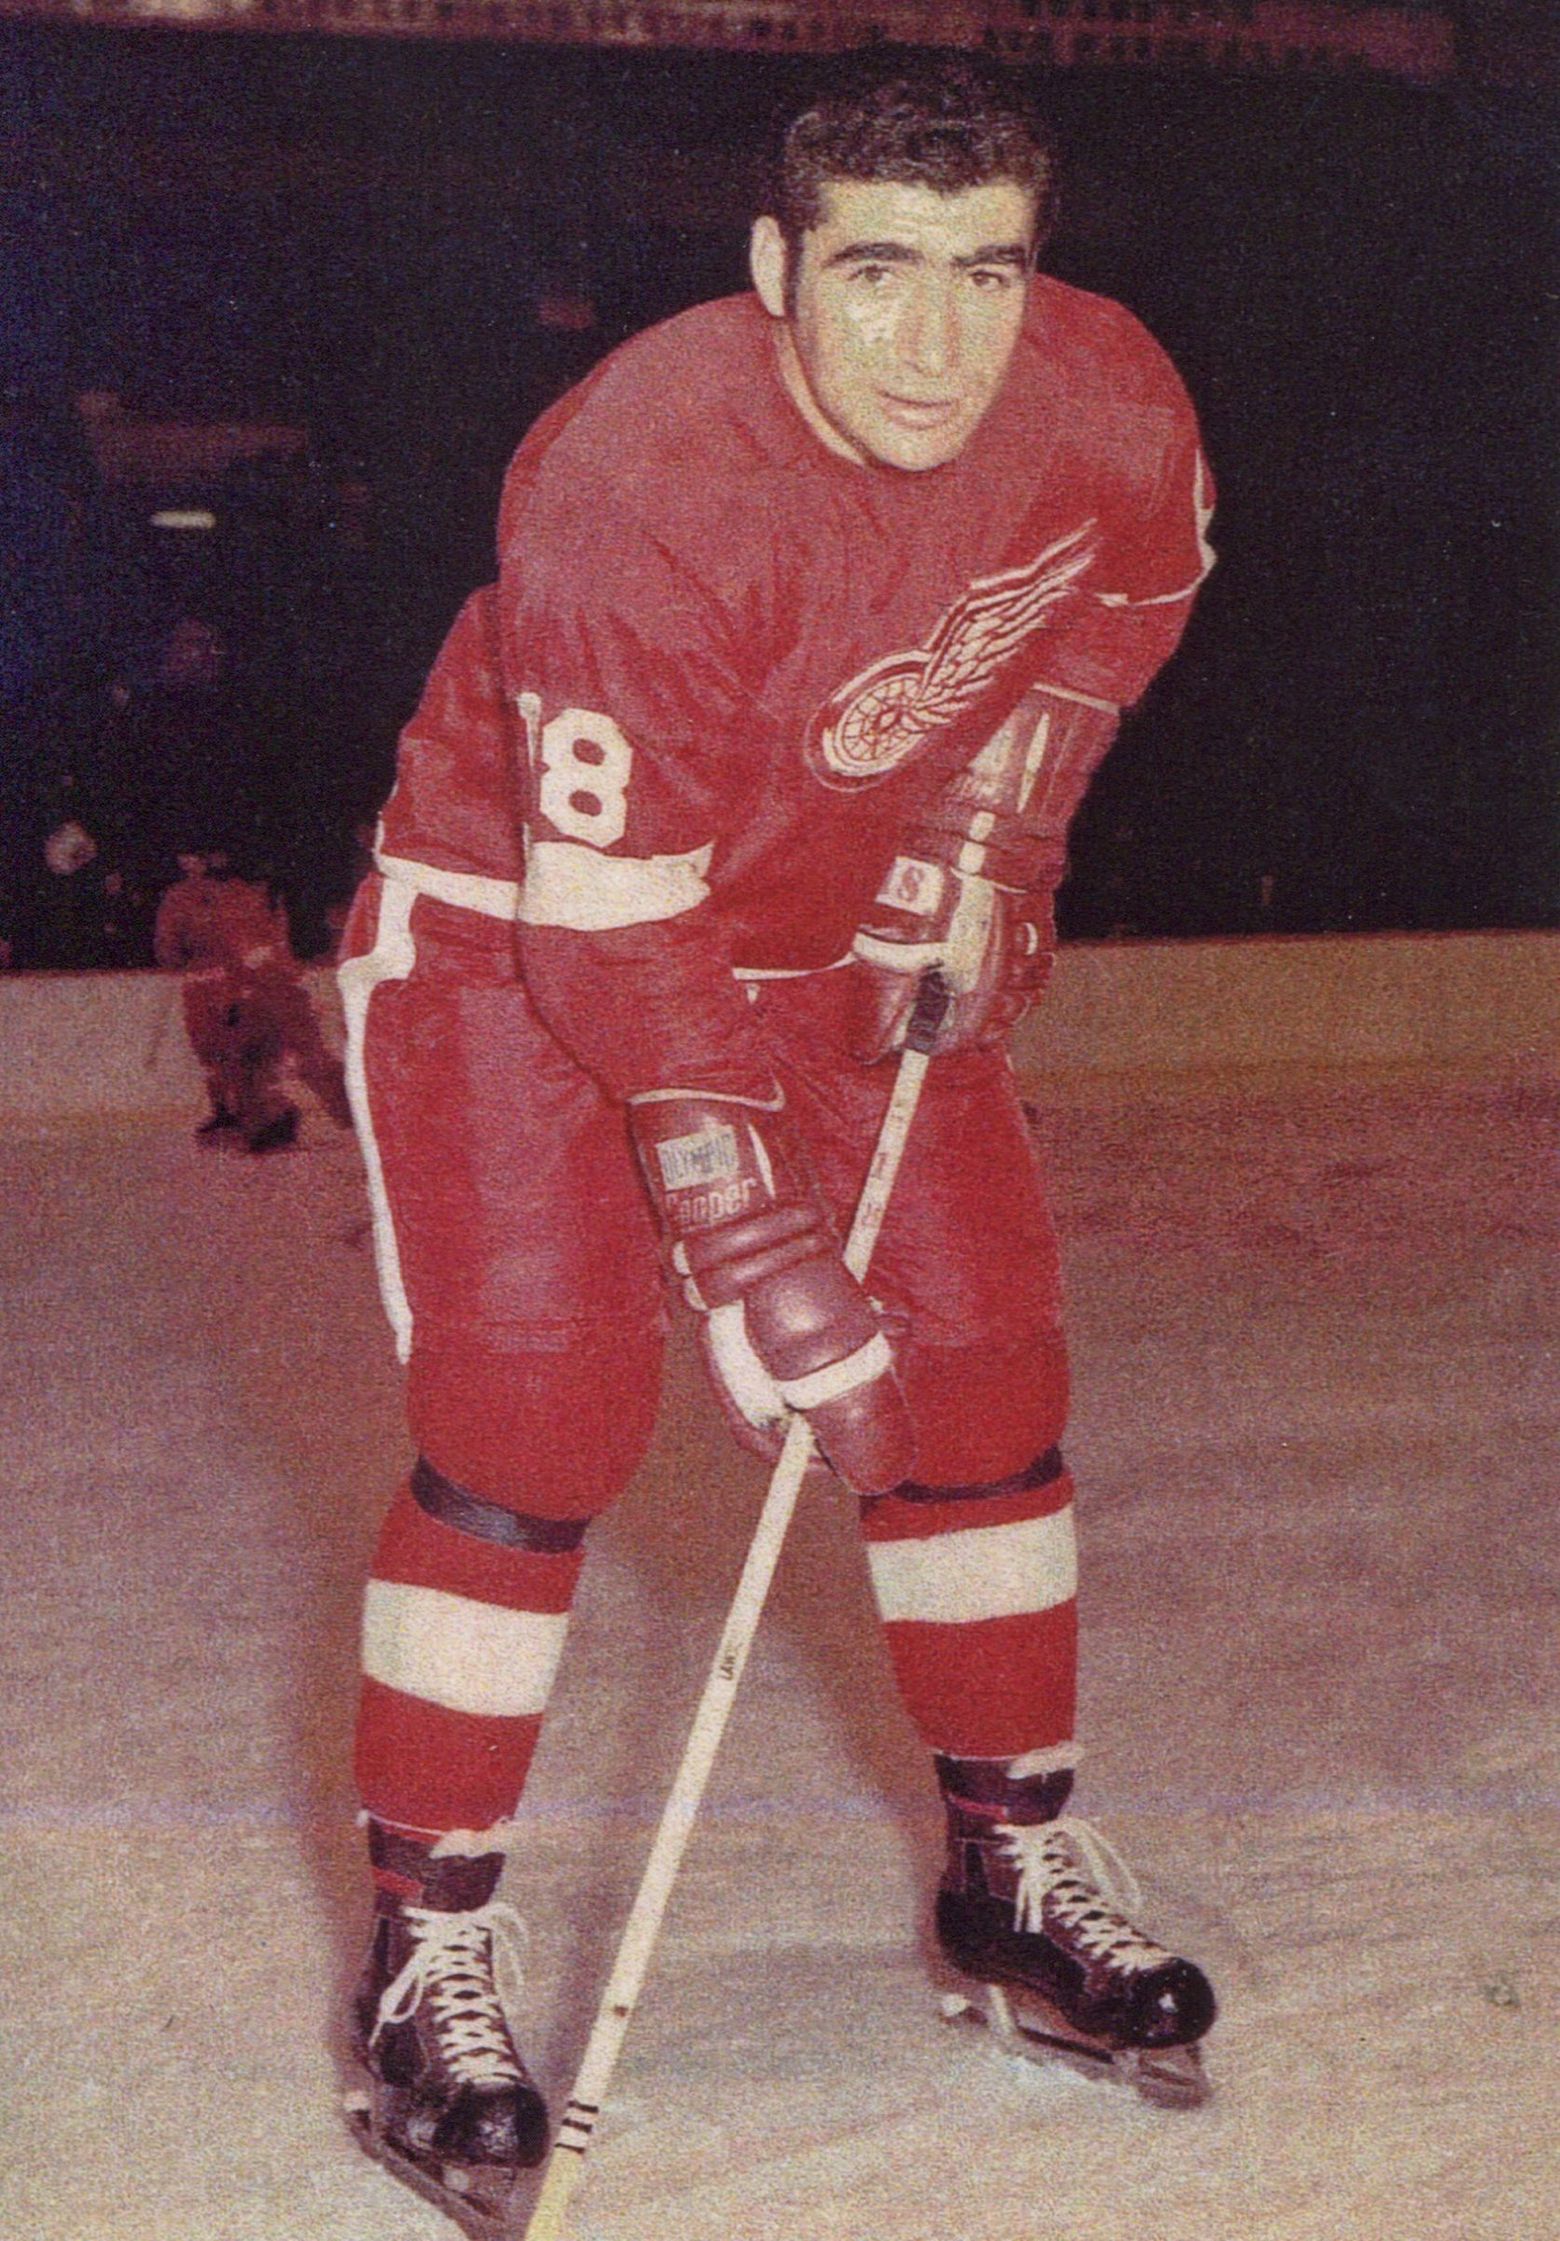 ON THIS DAY - DECEMBER 3 1970: Frank Mahovlich of the Detroit Red